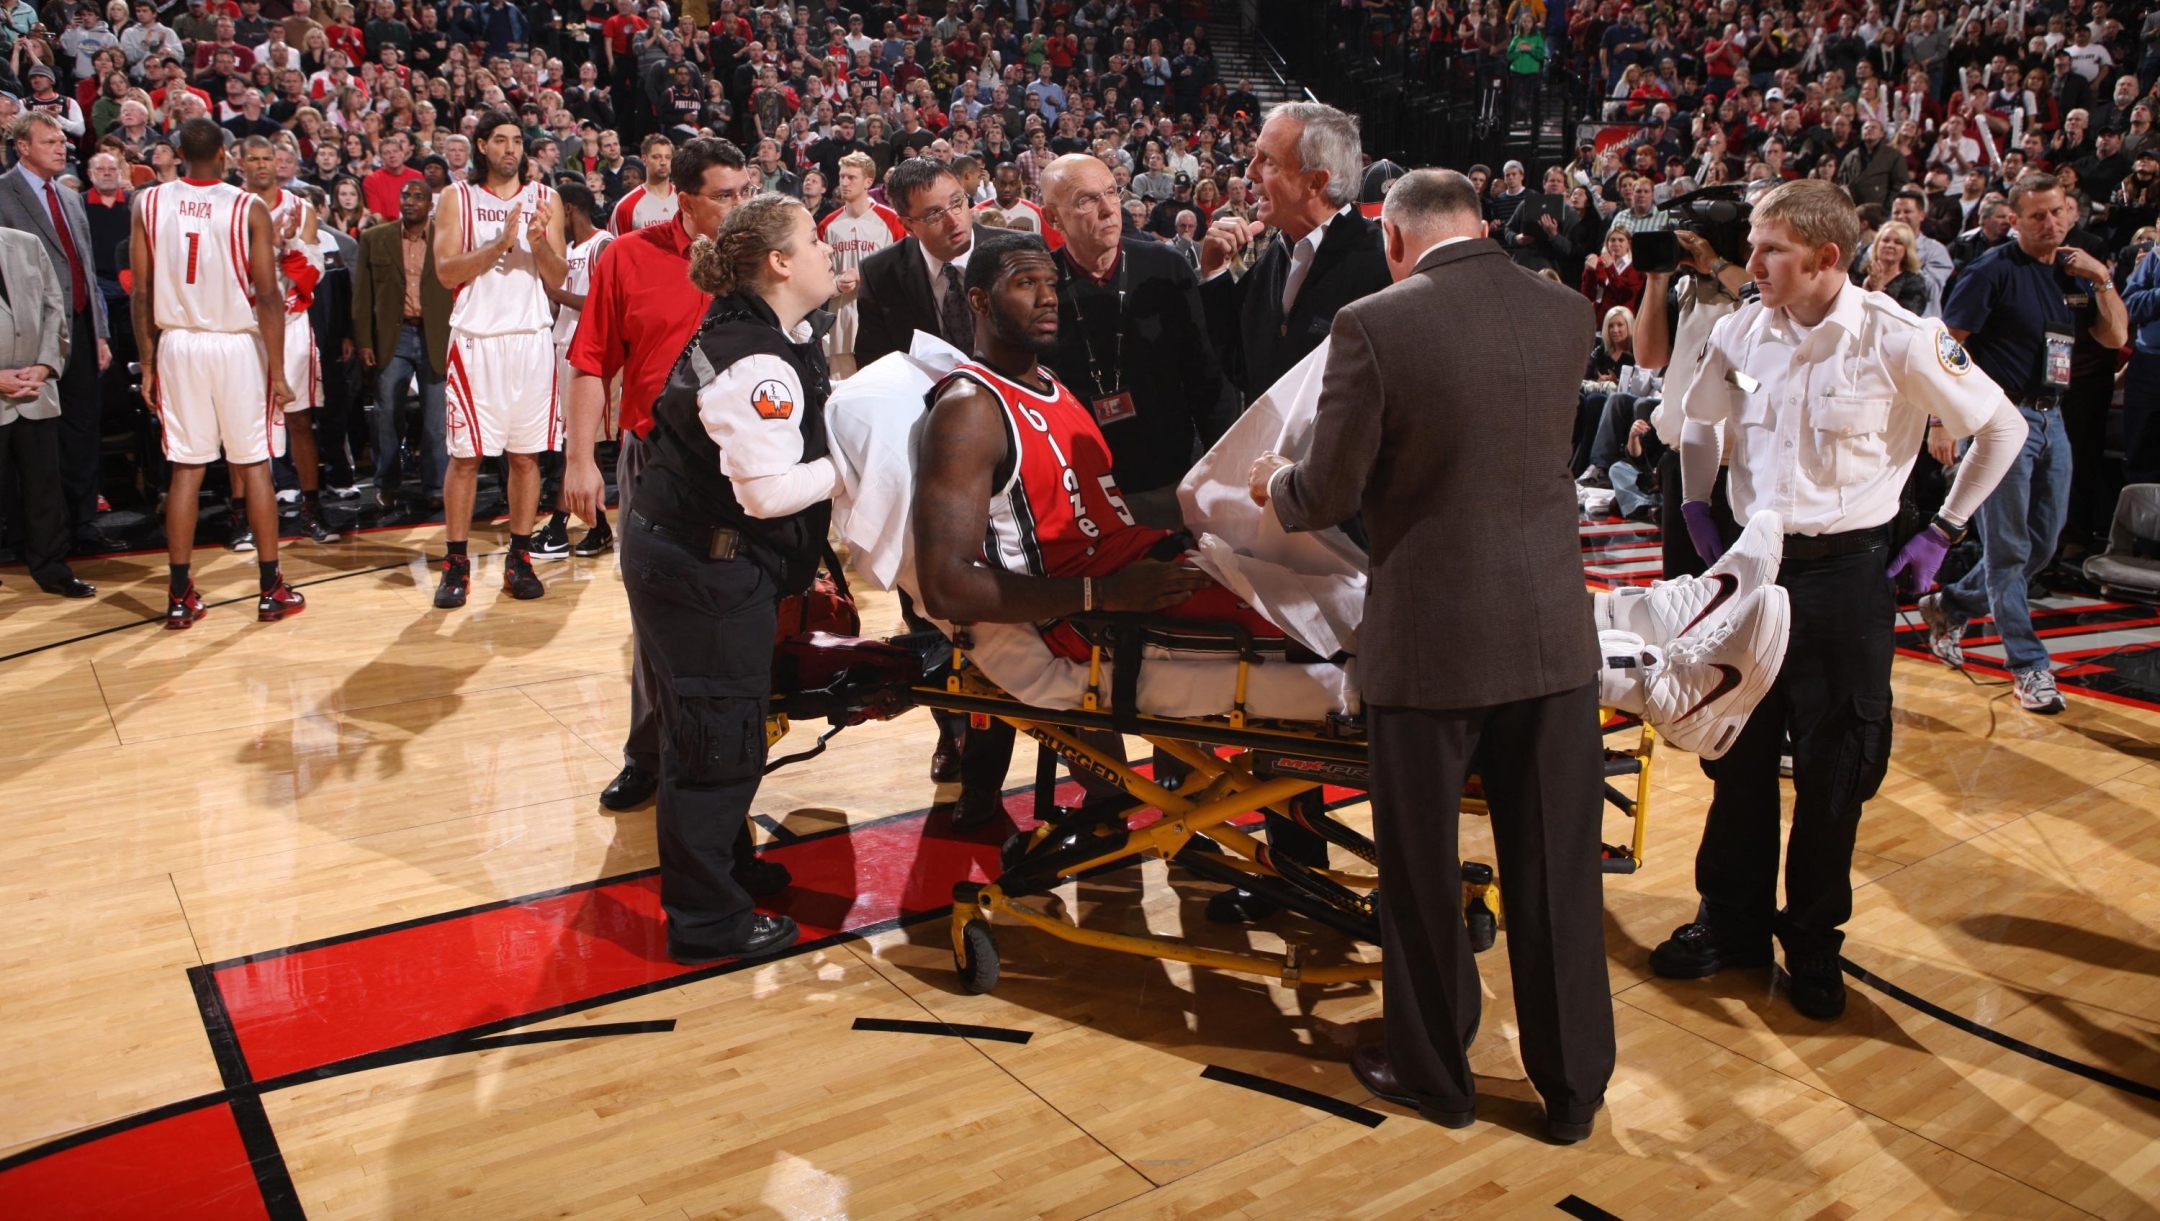 PORTLAND, OR - DECEMBER 5: Greg Oden #52 of the Portland Trail Blazers is helped my medical staff after a knee injury during a game against the Houston Rockets on December 5, 2009 at the Rose Garden Arena in Portland, Oregon. NOTE TO USER: User expressly acknowledges and agrees that, by downloading and or using this photograph, User is consenting to the terms and conditions of the Getty Images License Agreement. Mandatory Copyright Notice: Copyright 2009 NBAE   Sam Forencich/NBAE via Getty Images/AFP (Photo by SAM FORENCICH / NBAE / Getty Images / Getty Images via AFP)